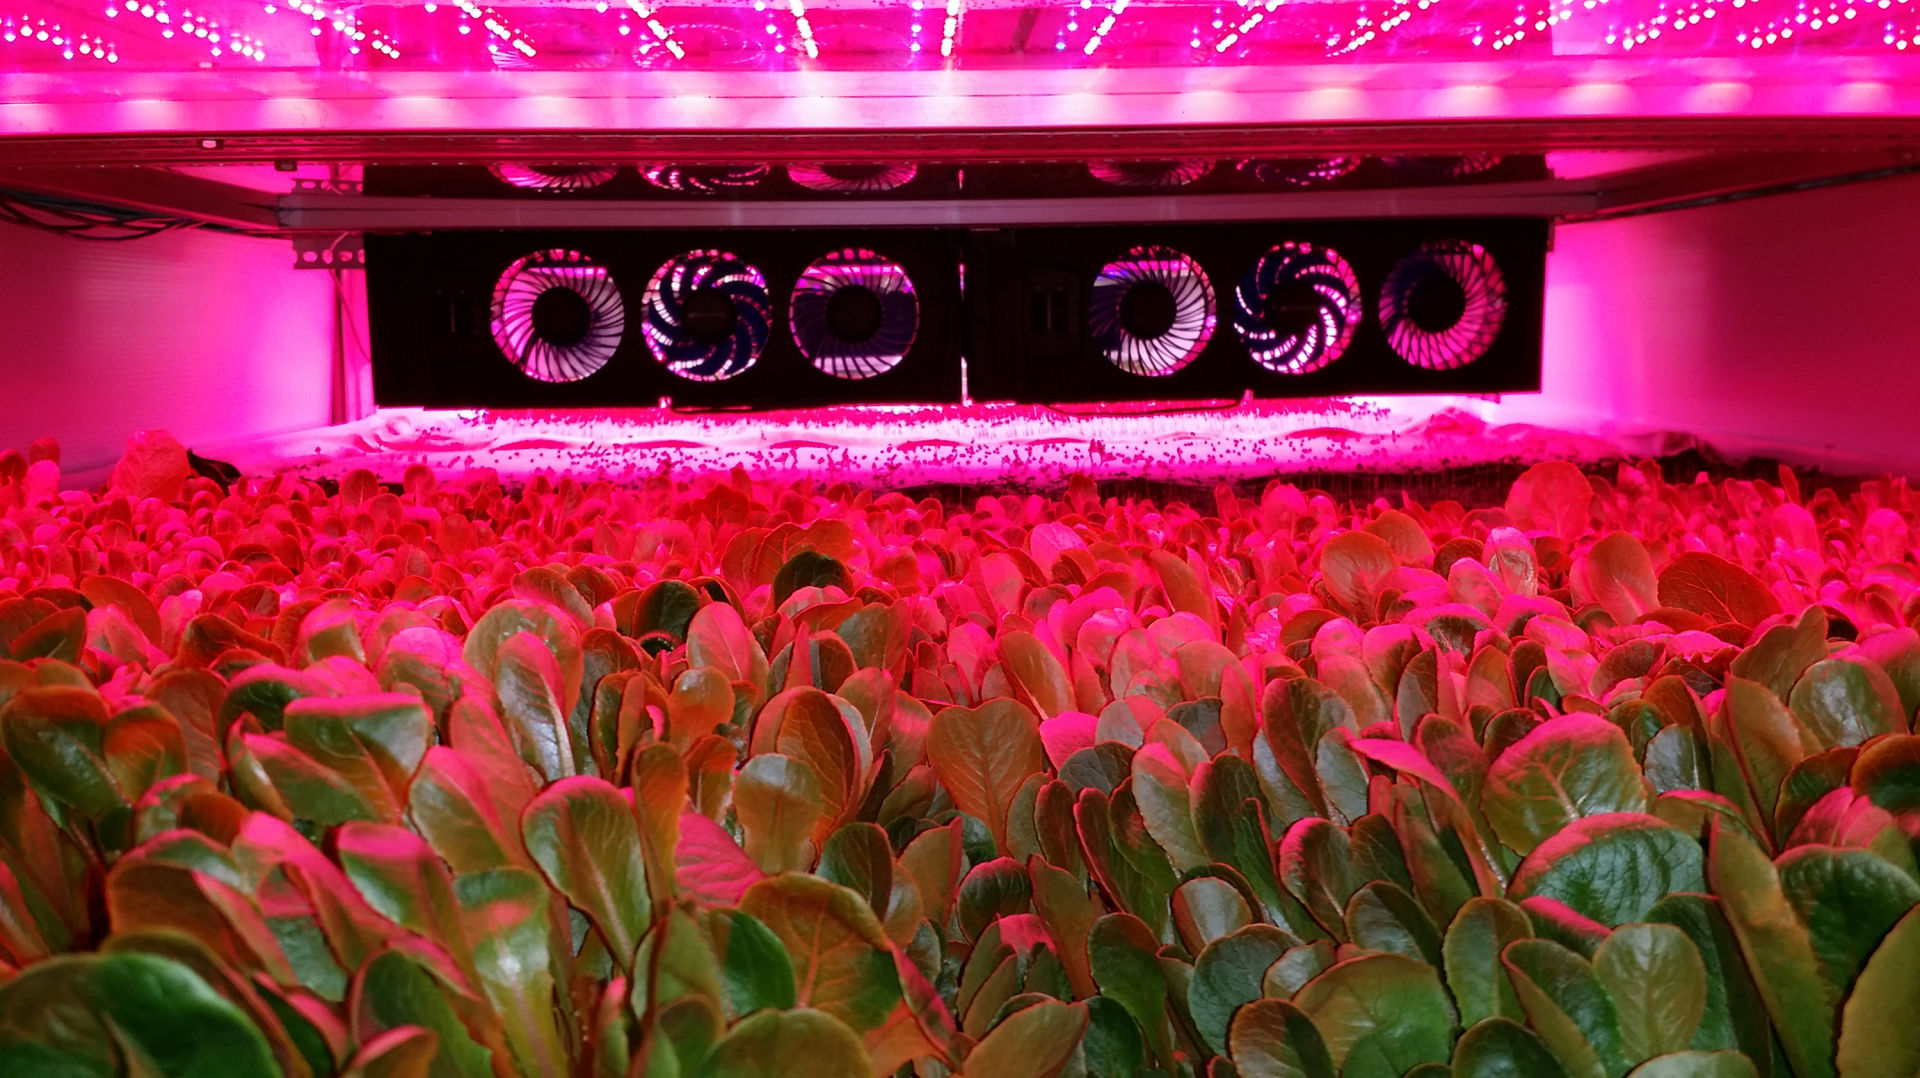 AeroFarms grows greens under intense LED grow lights, while their roots are bathed in a nutrient-rich mist.